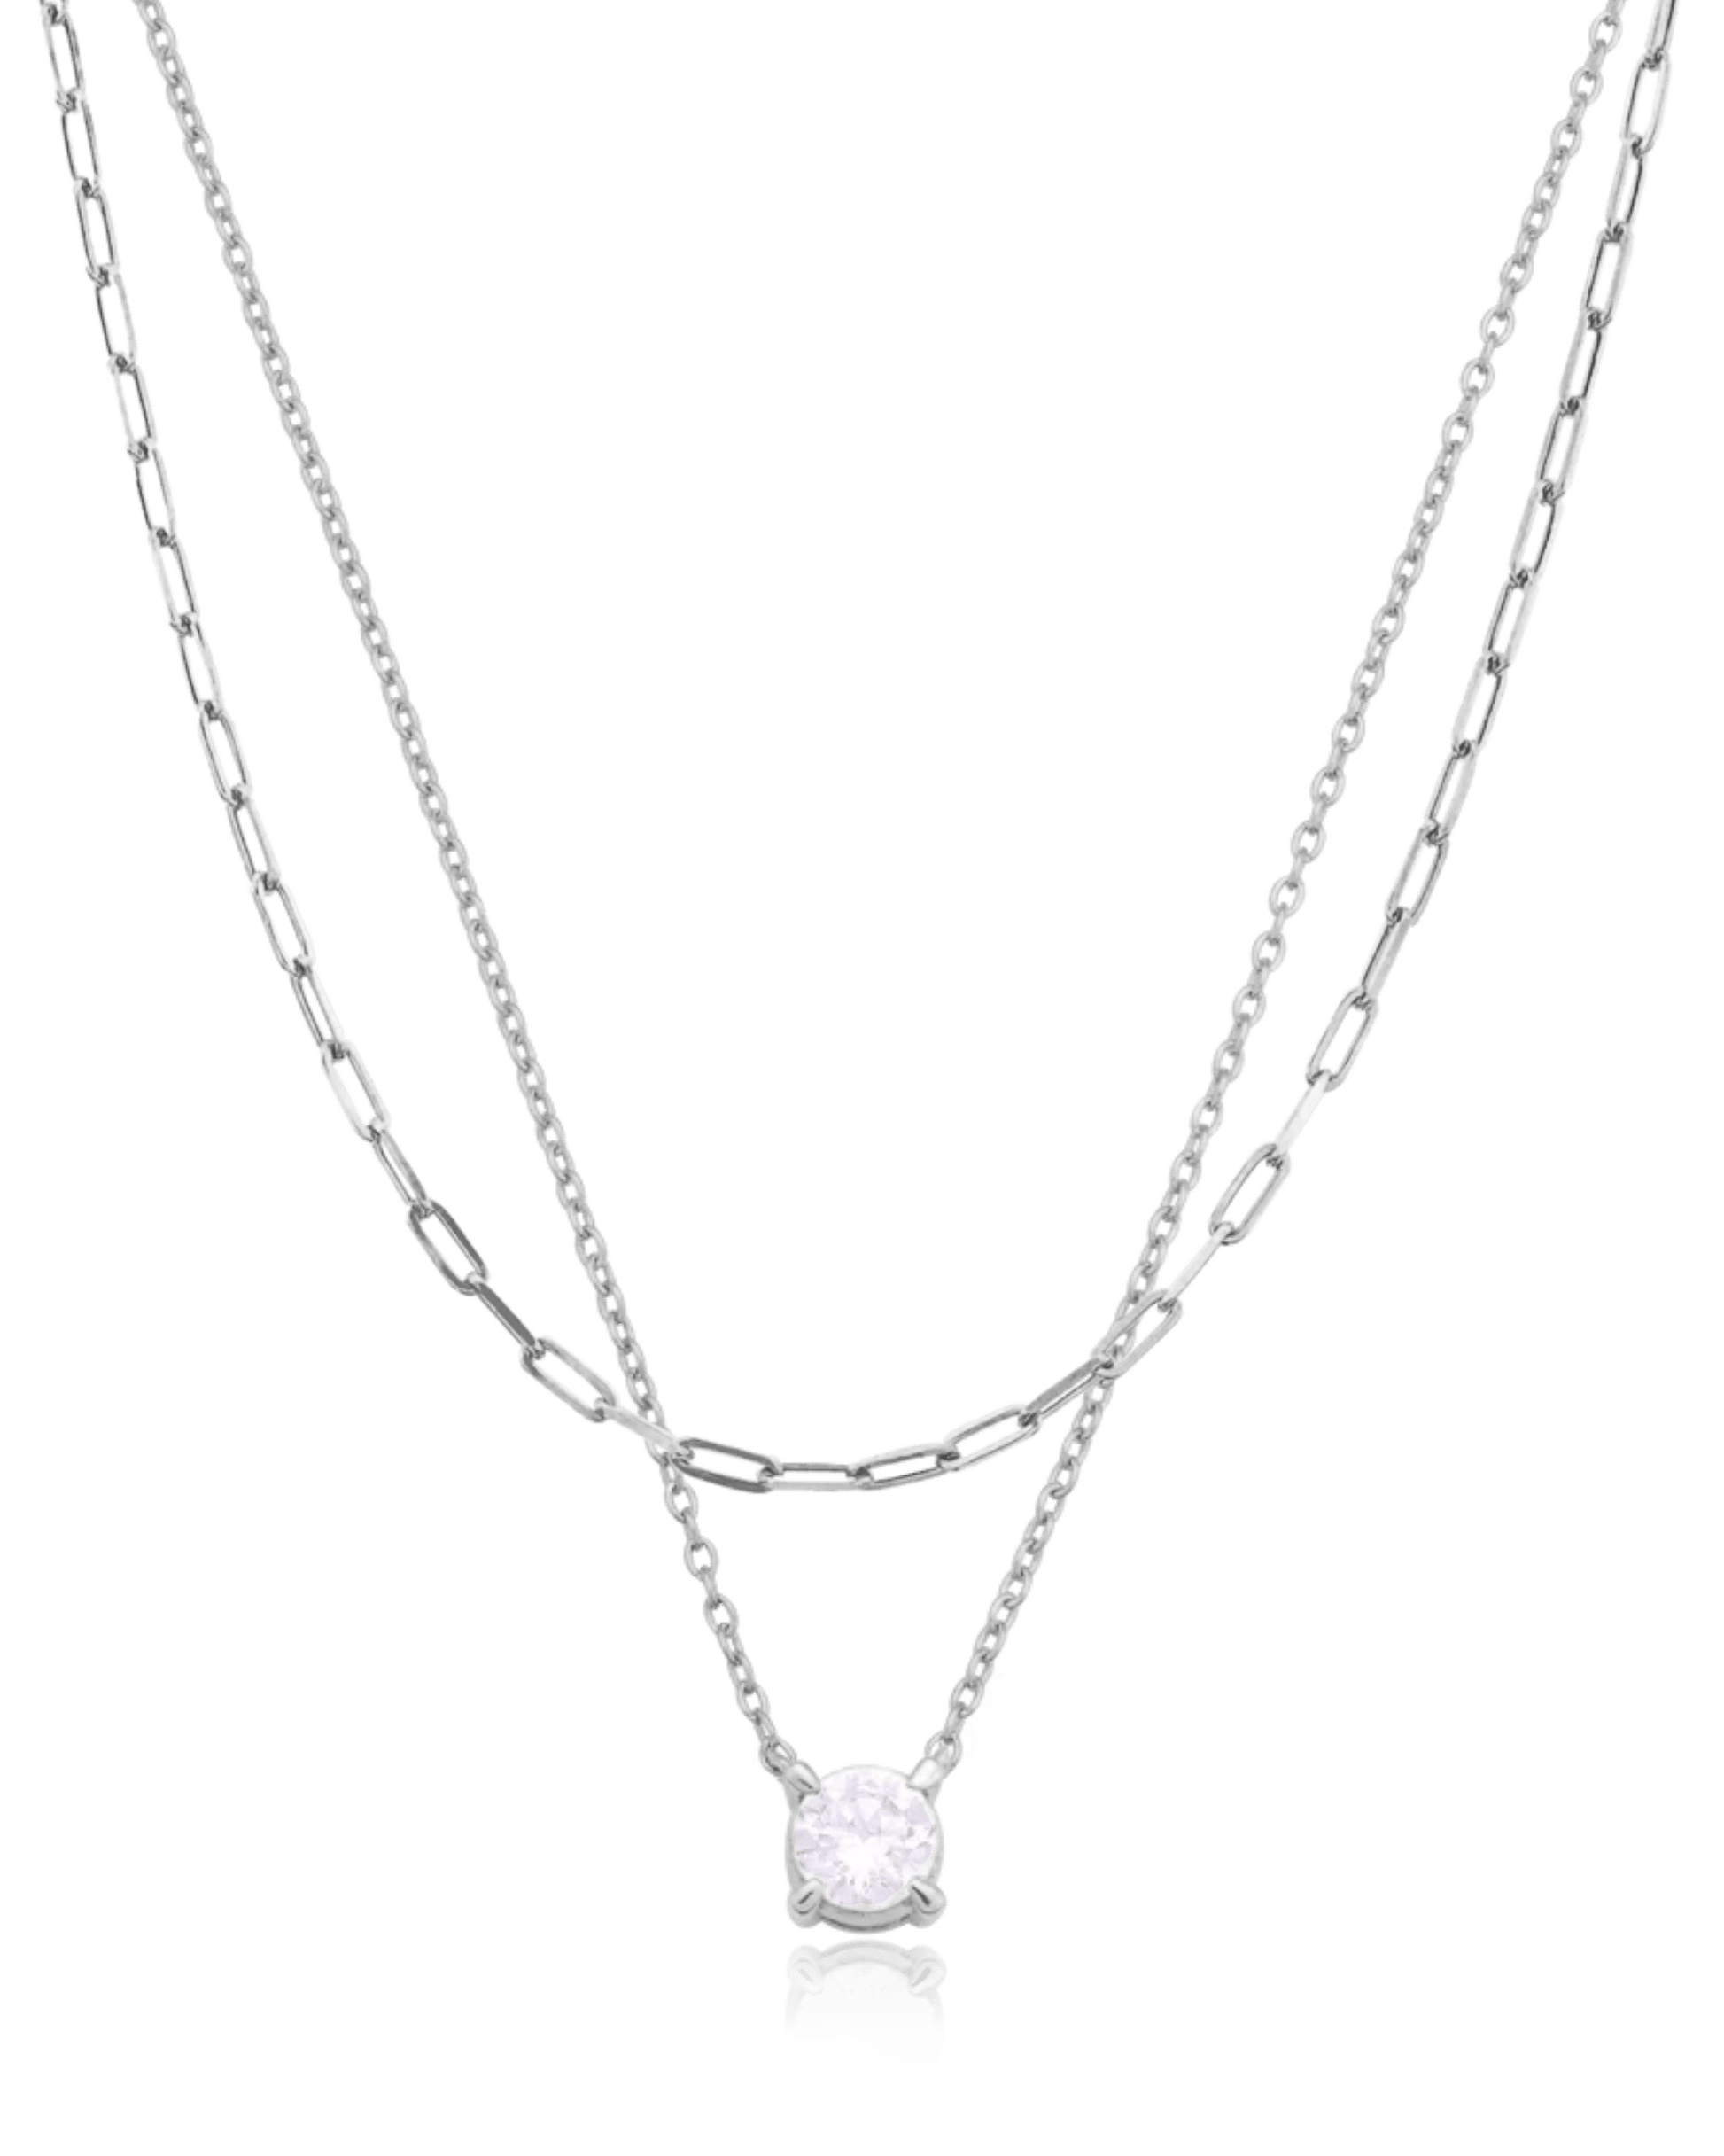 Set of Round Solitaire Diamond & Links Chain Necklaces - 925 Sterling Silver Necklaces magal-dev 0.10 CT 